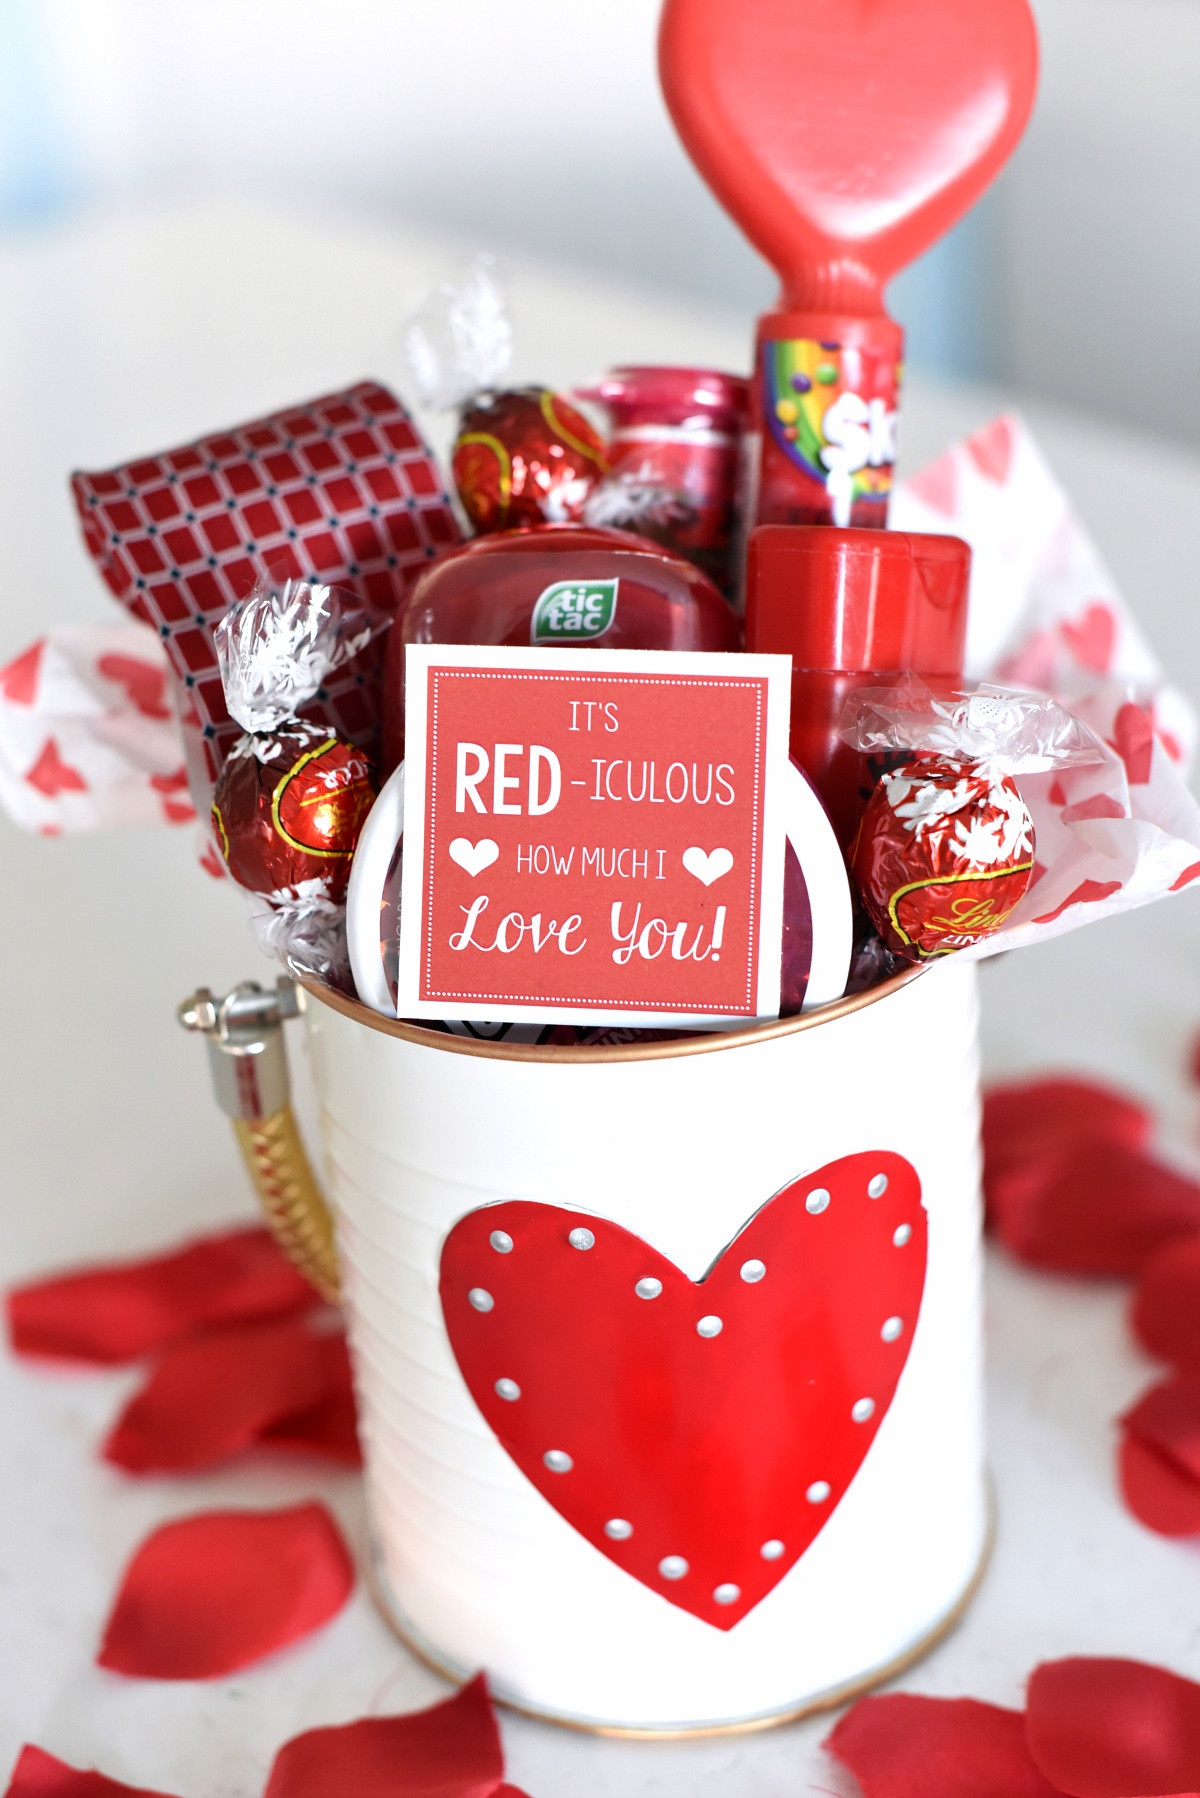 Husband Valentines Gift Ideas
 Cute Valentine s Day Gift Idea RED iculous Basket